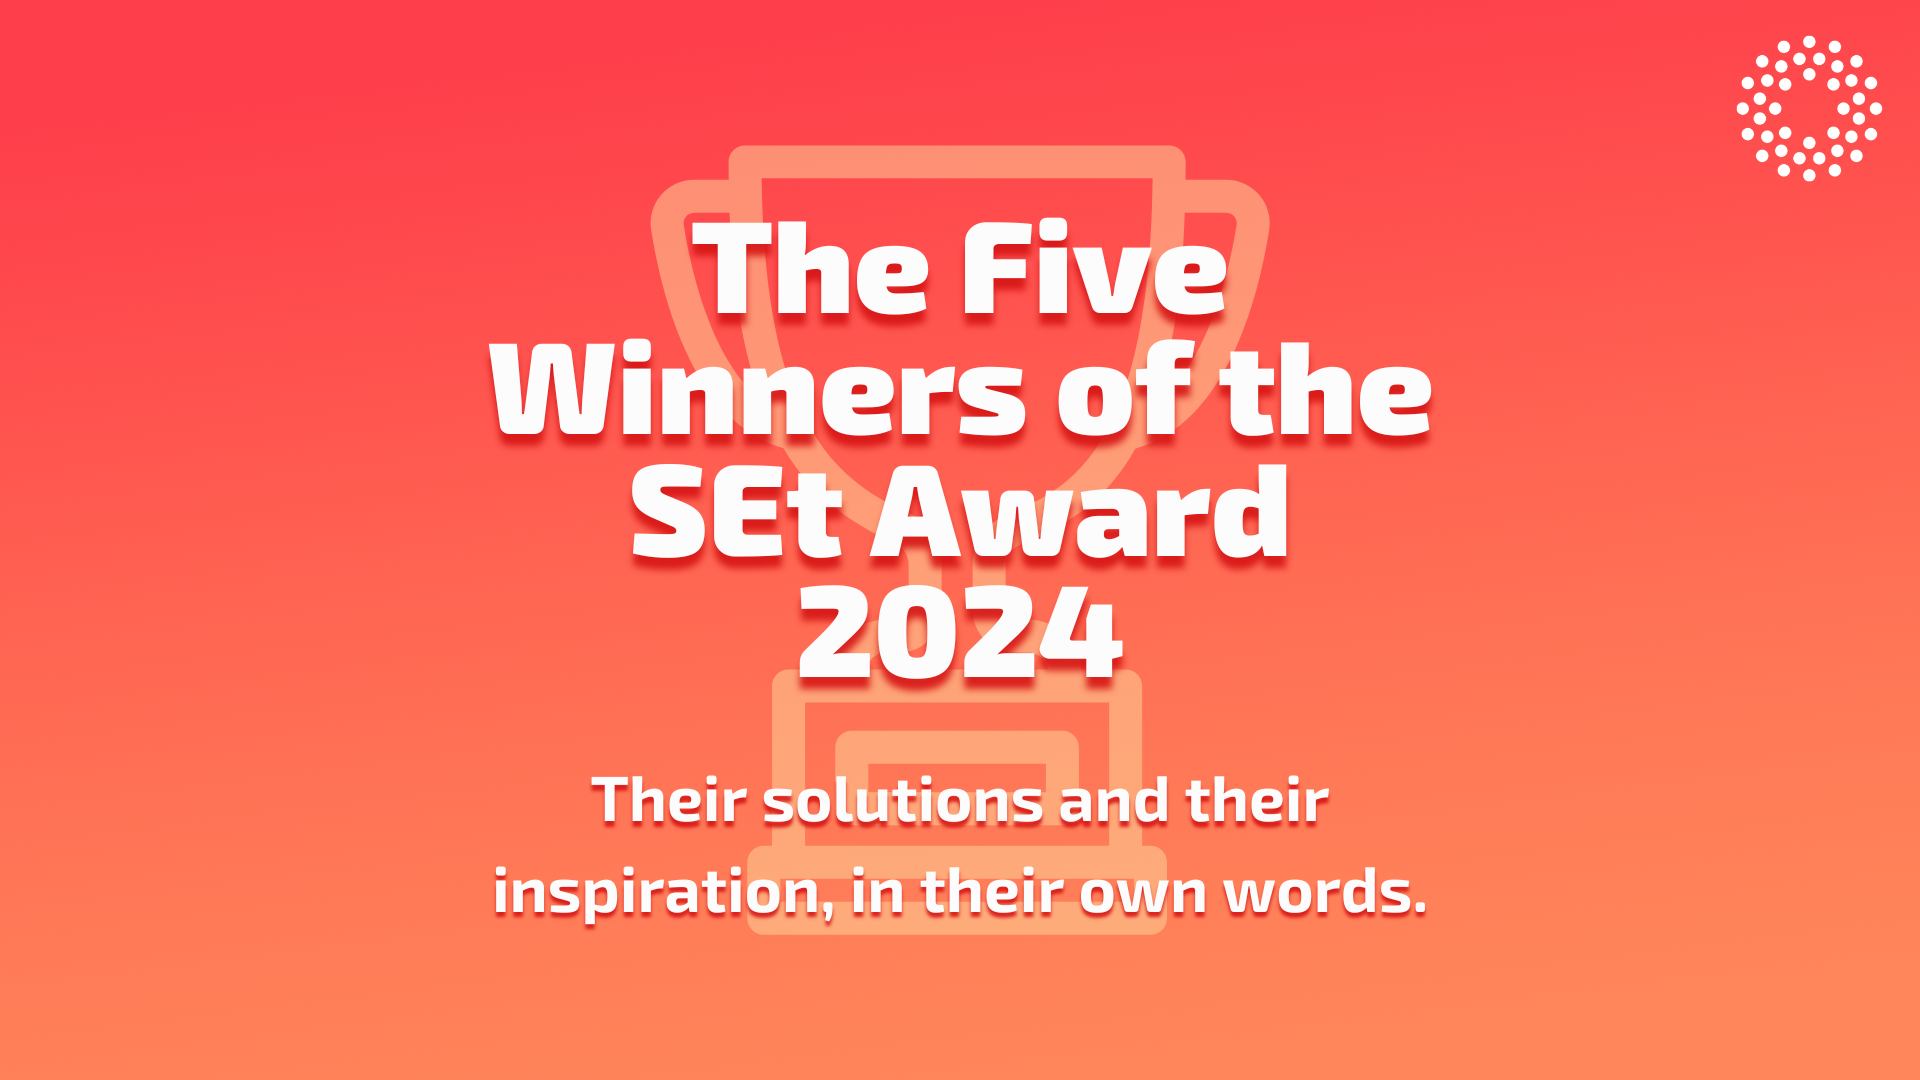 SET Award 2024: Top 5 Global Energy Startups of the Year